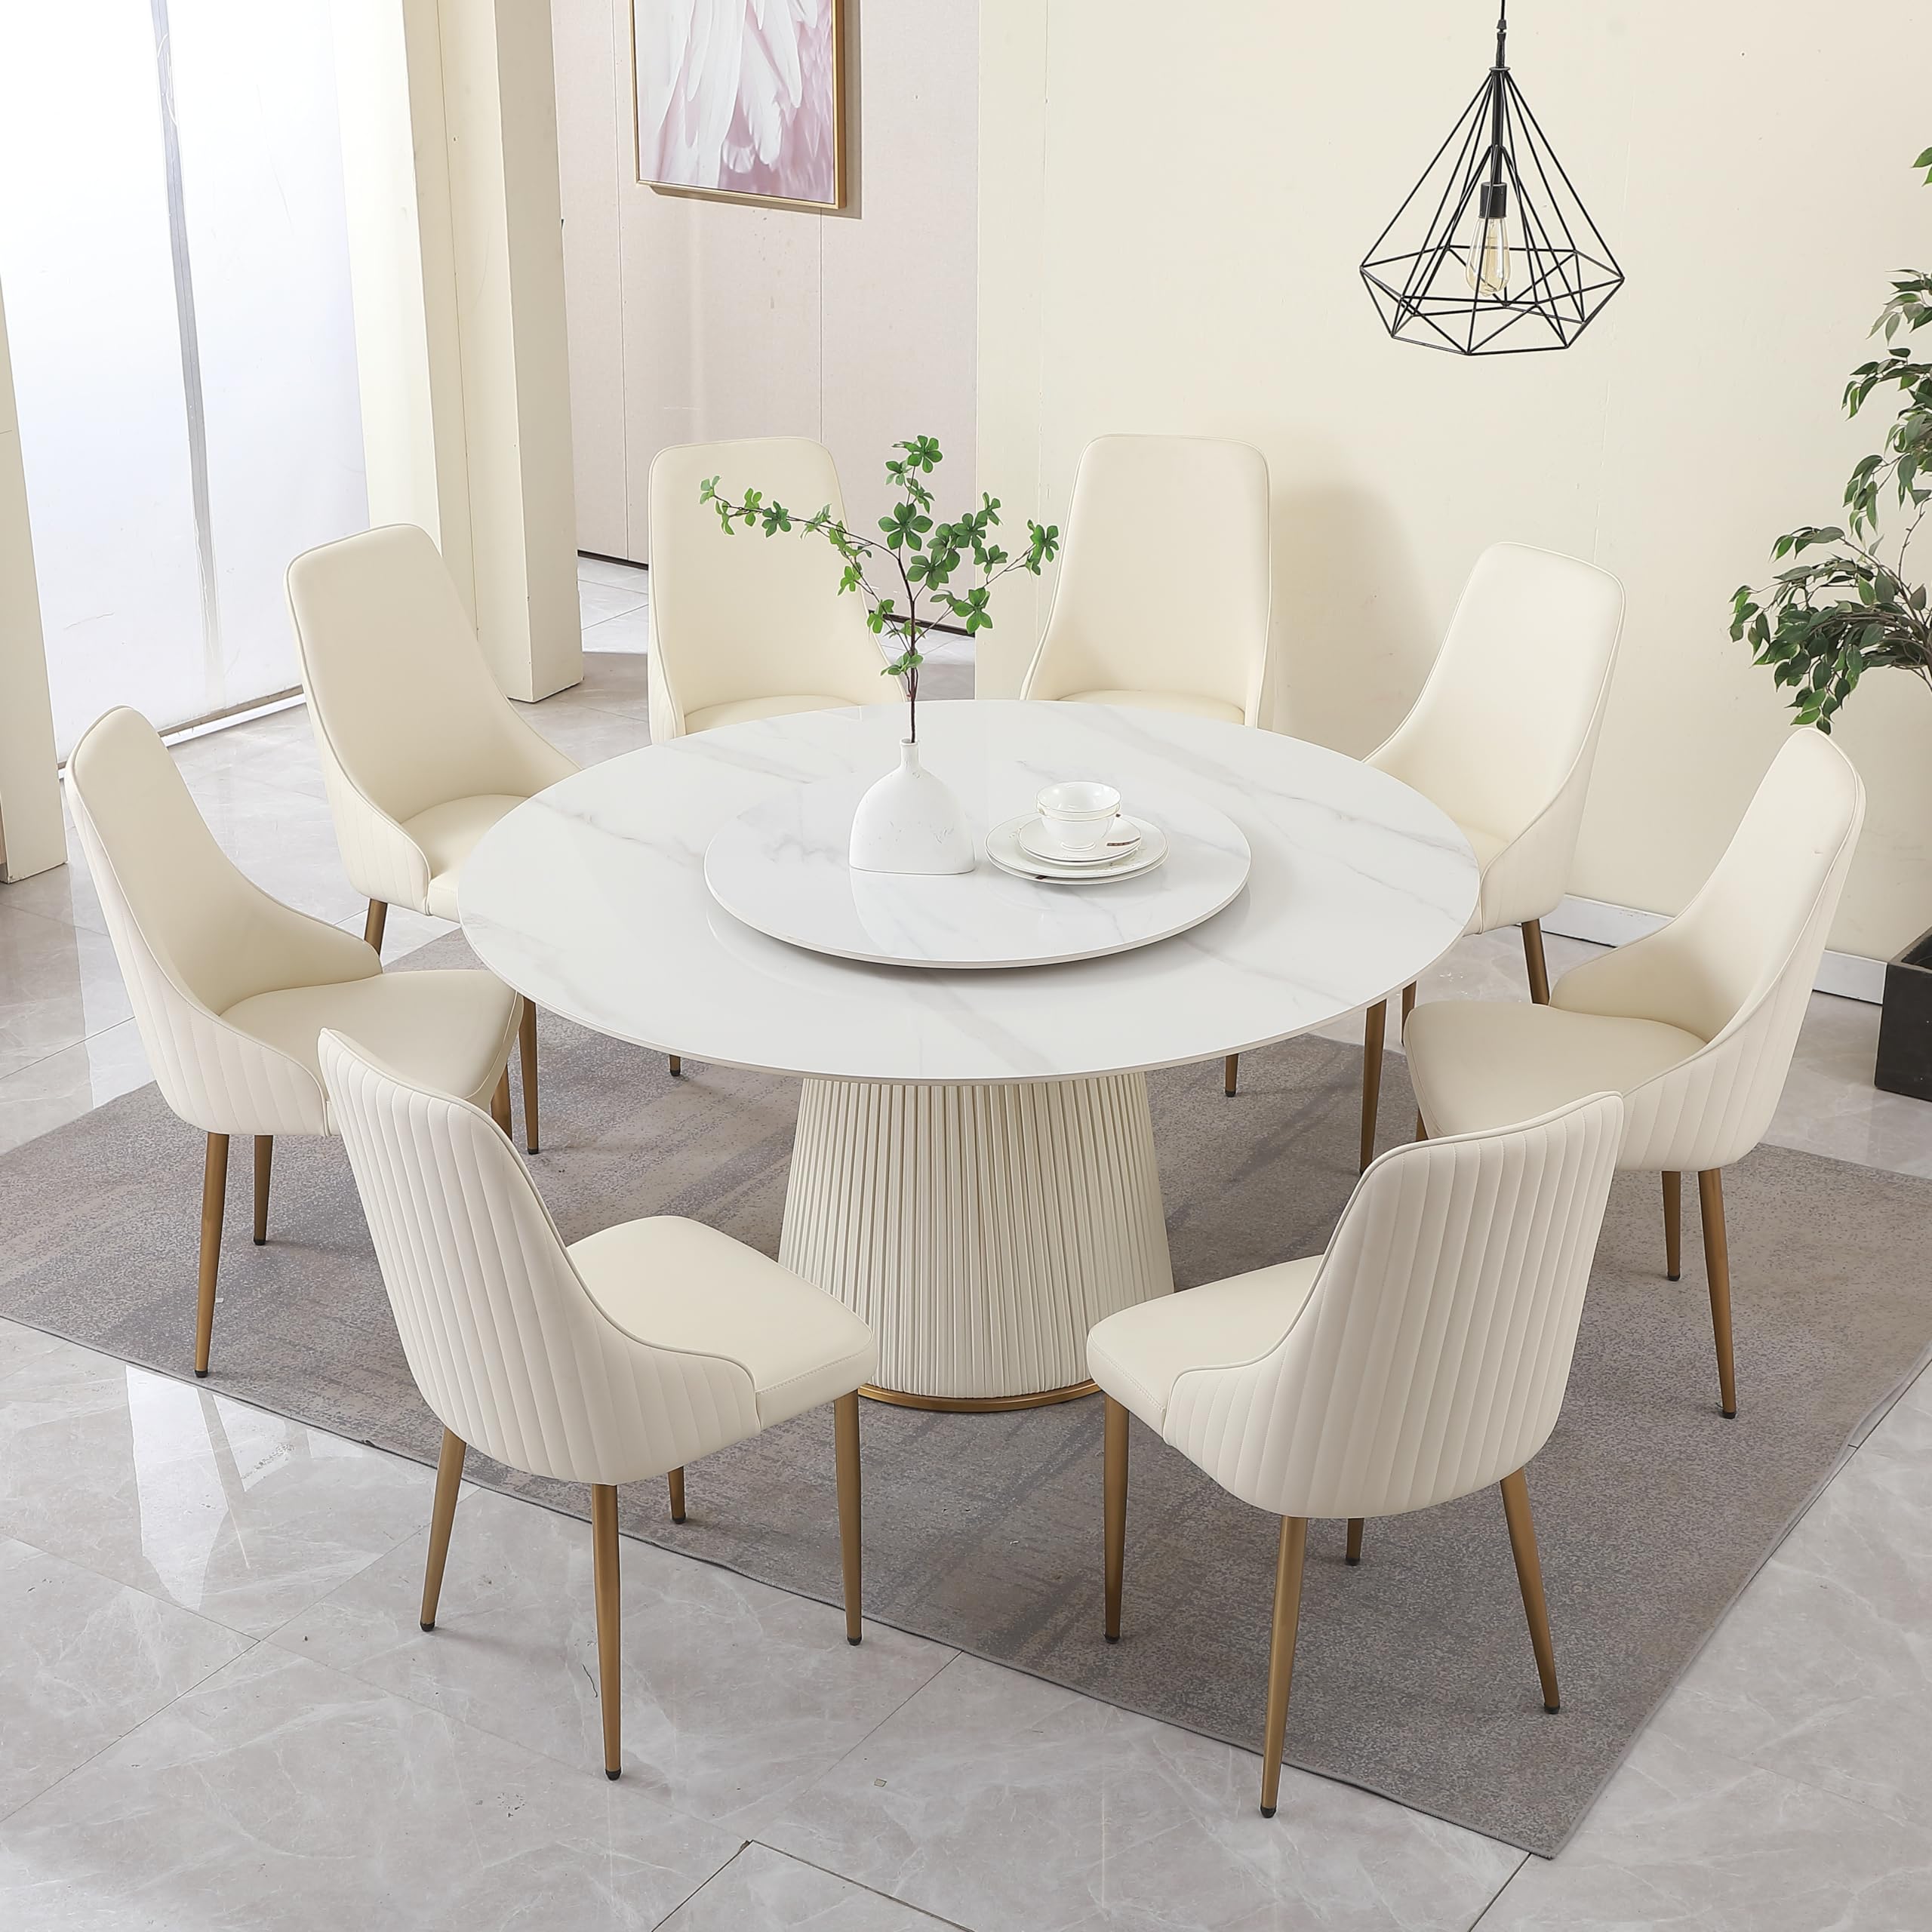 Montary 59.05" Modern Sintered Stone Round Dining Table with 31.5" Round Turntable